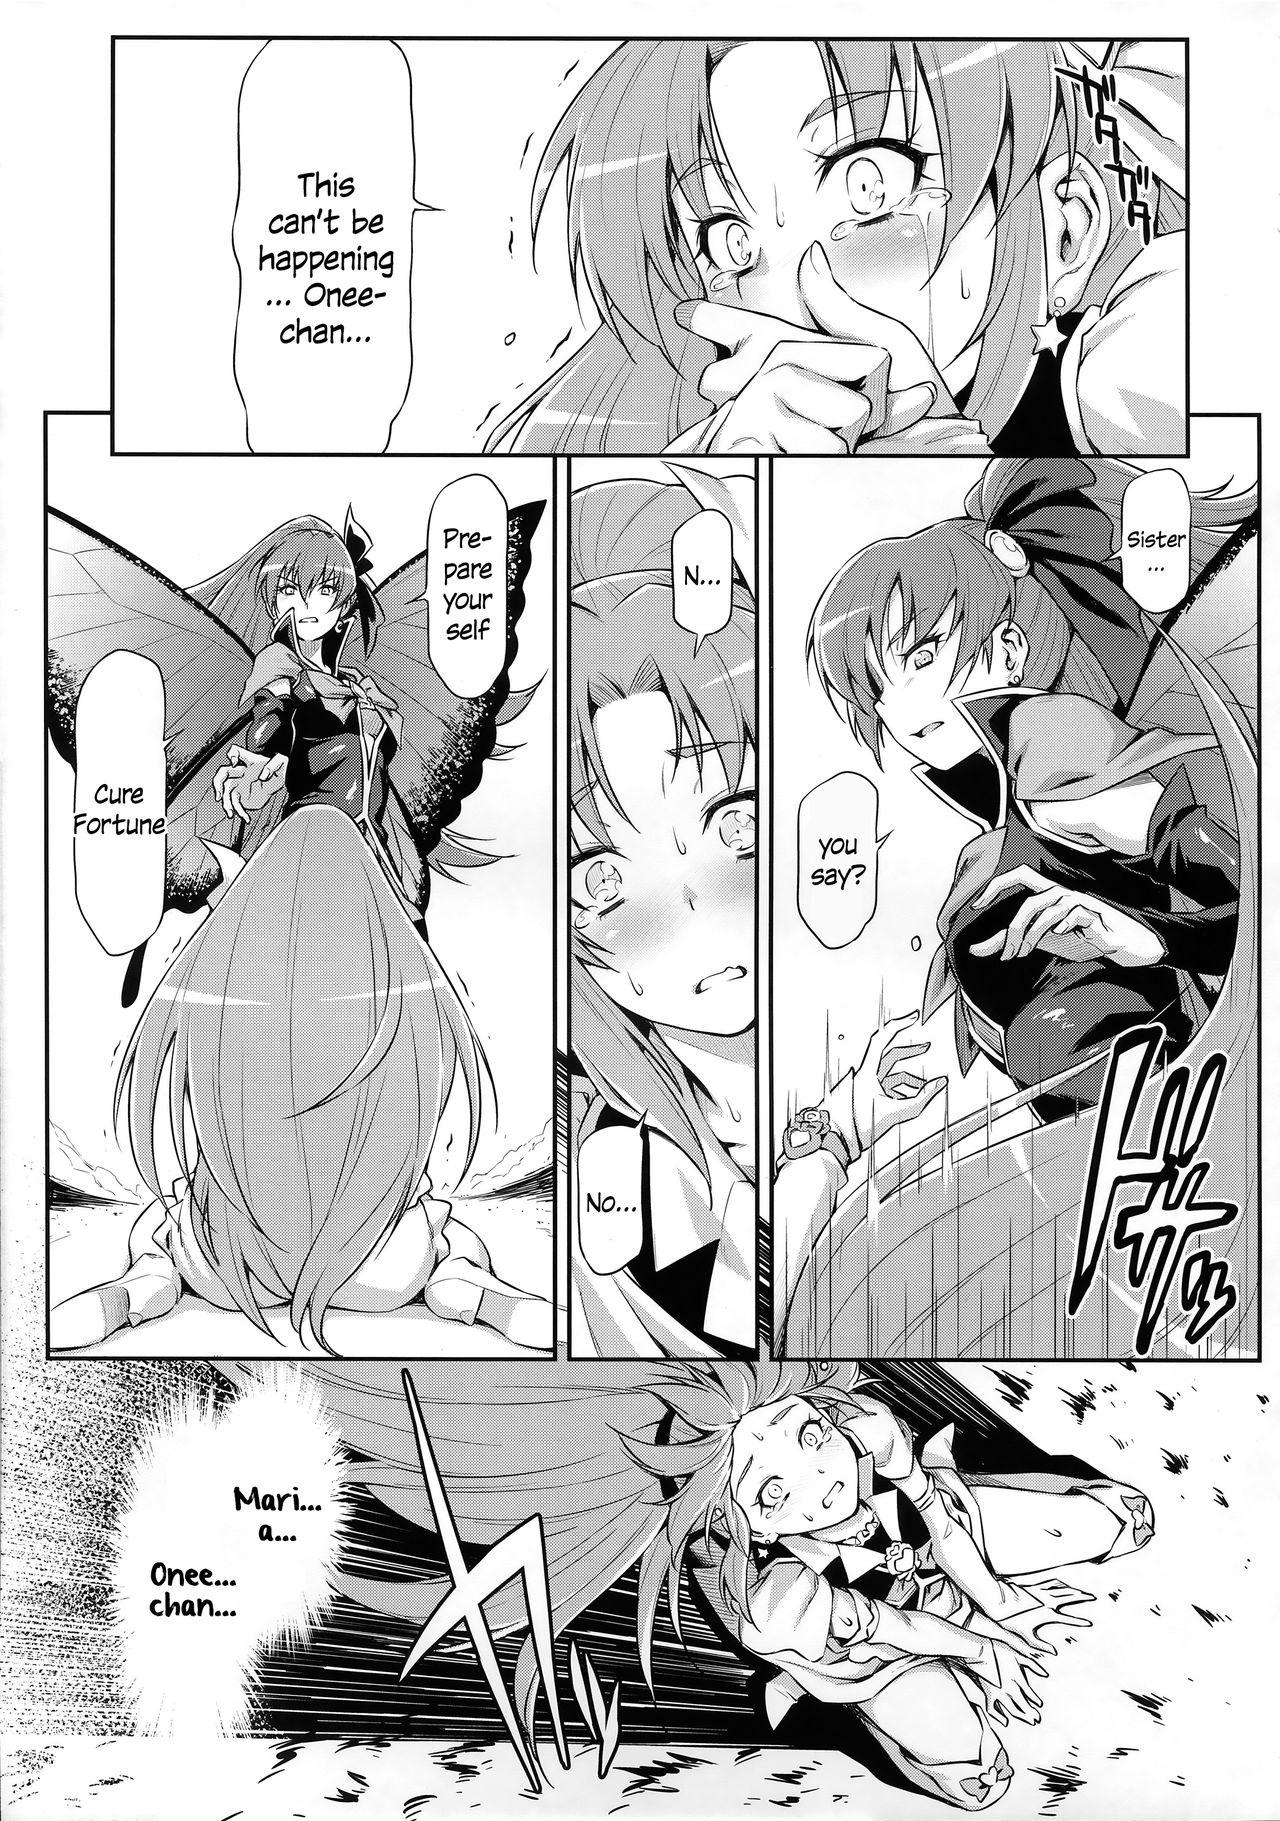 Cojiendo Butterfly and Chrysalis - Happinesscharge precure Turkish - Page 8